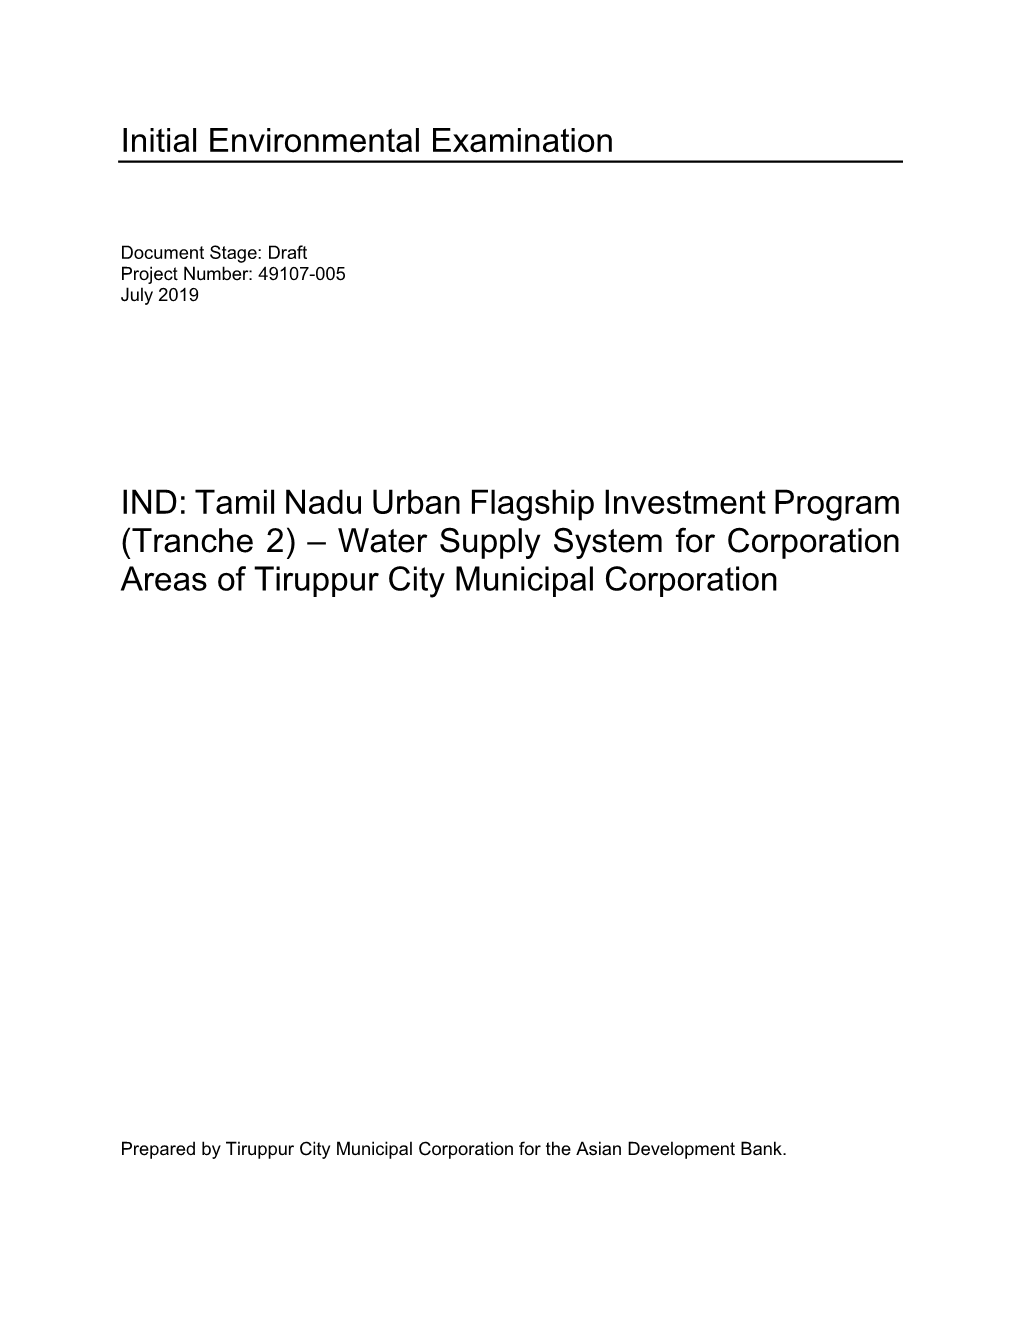 Tamil Nadu Urban Flagship Investment Program (Tranche 2) – Water Supply System for Corporation Areas of Tiruppur City Municipal Corporation